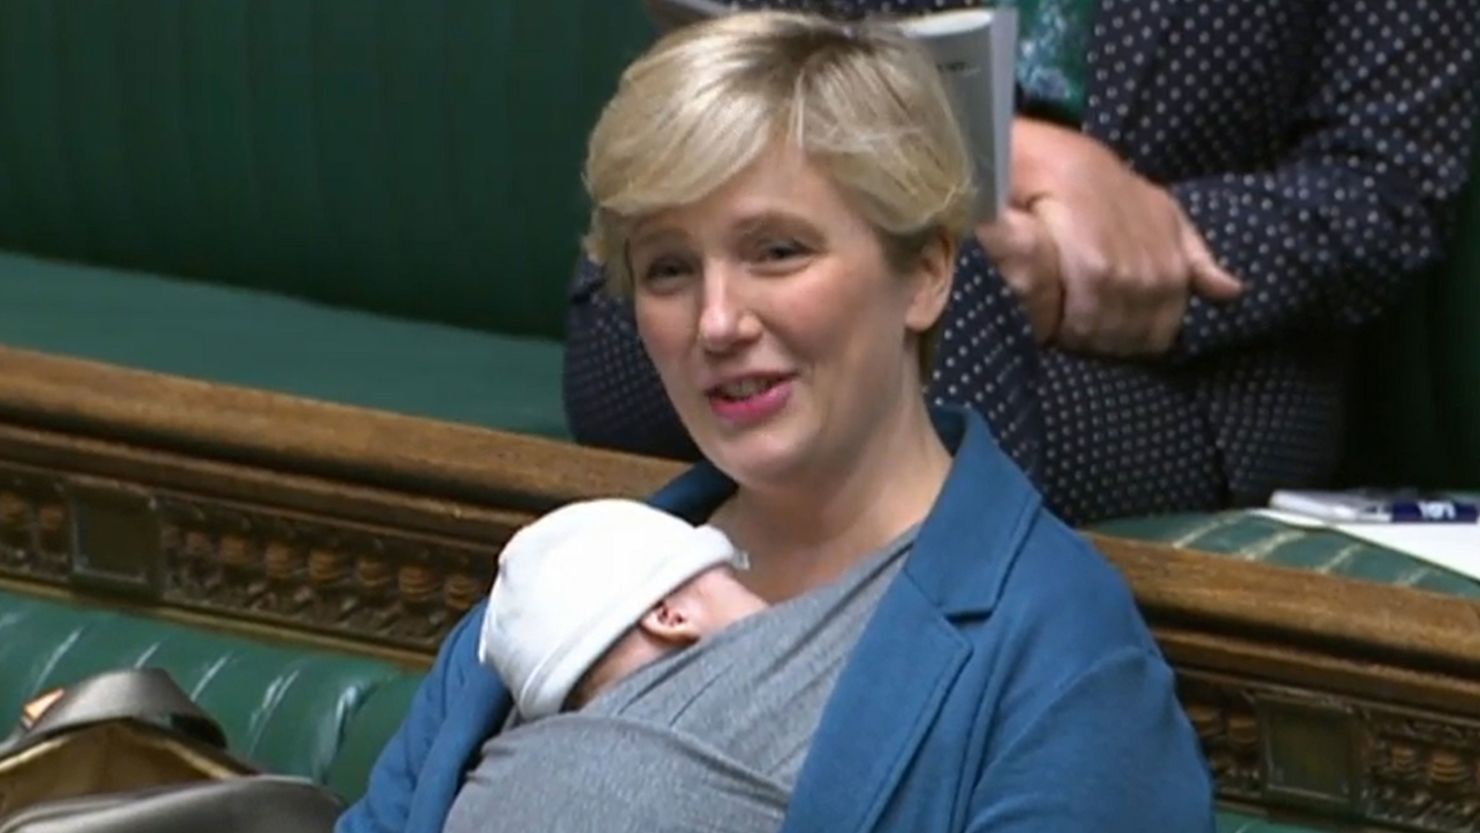 Labour MP Stella Creasy with her newborn baby in the chamber of Britain's House of Commons in September 